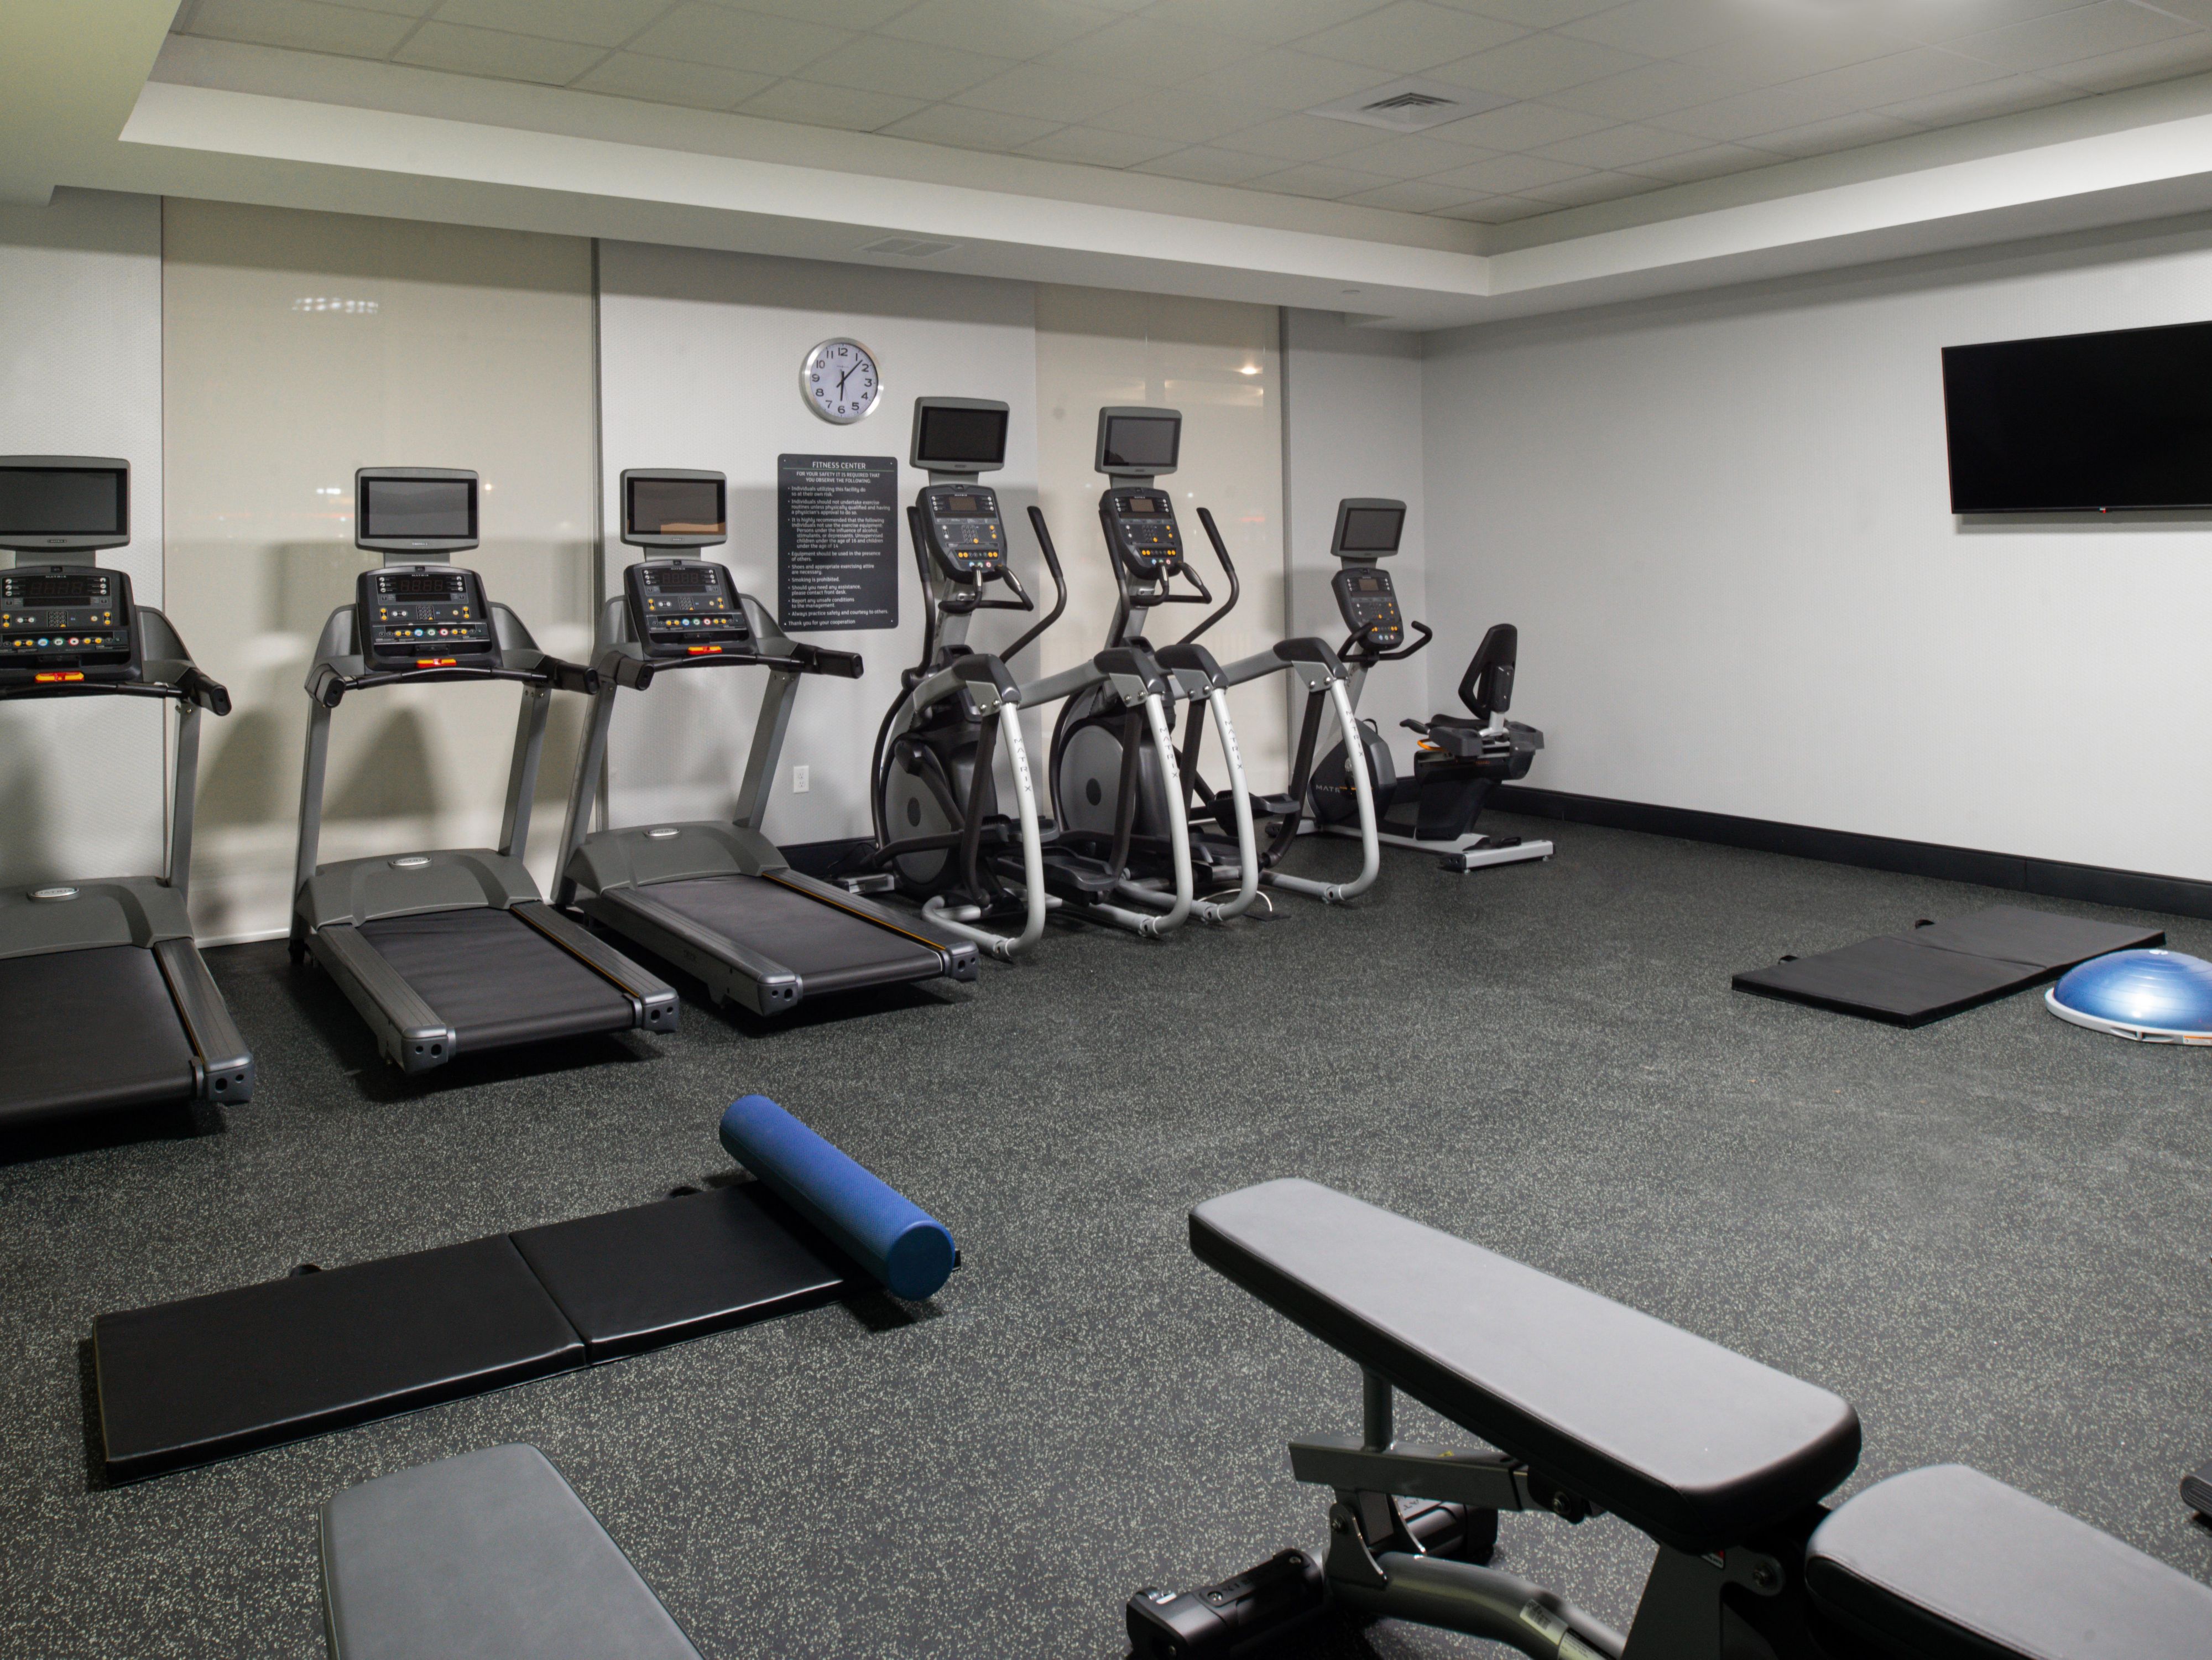 Our guests can take advantage of our brand new 24 Hour Fitness Center. Complete with free weights, exercise balls, tandem bikes, ellipticals and treadmills. 